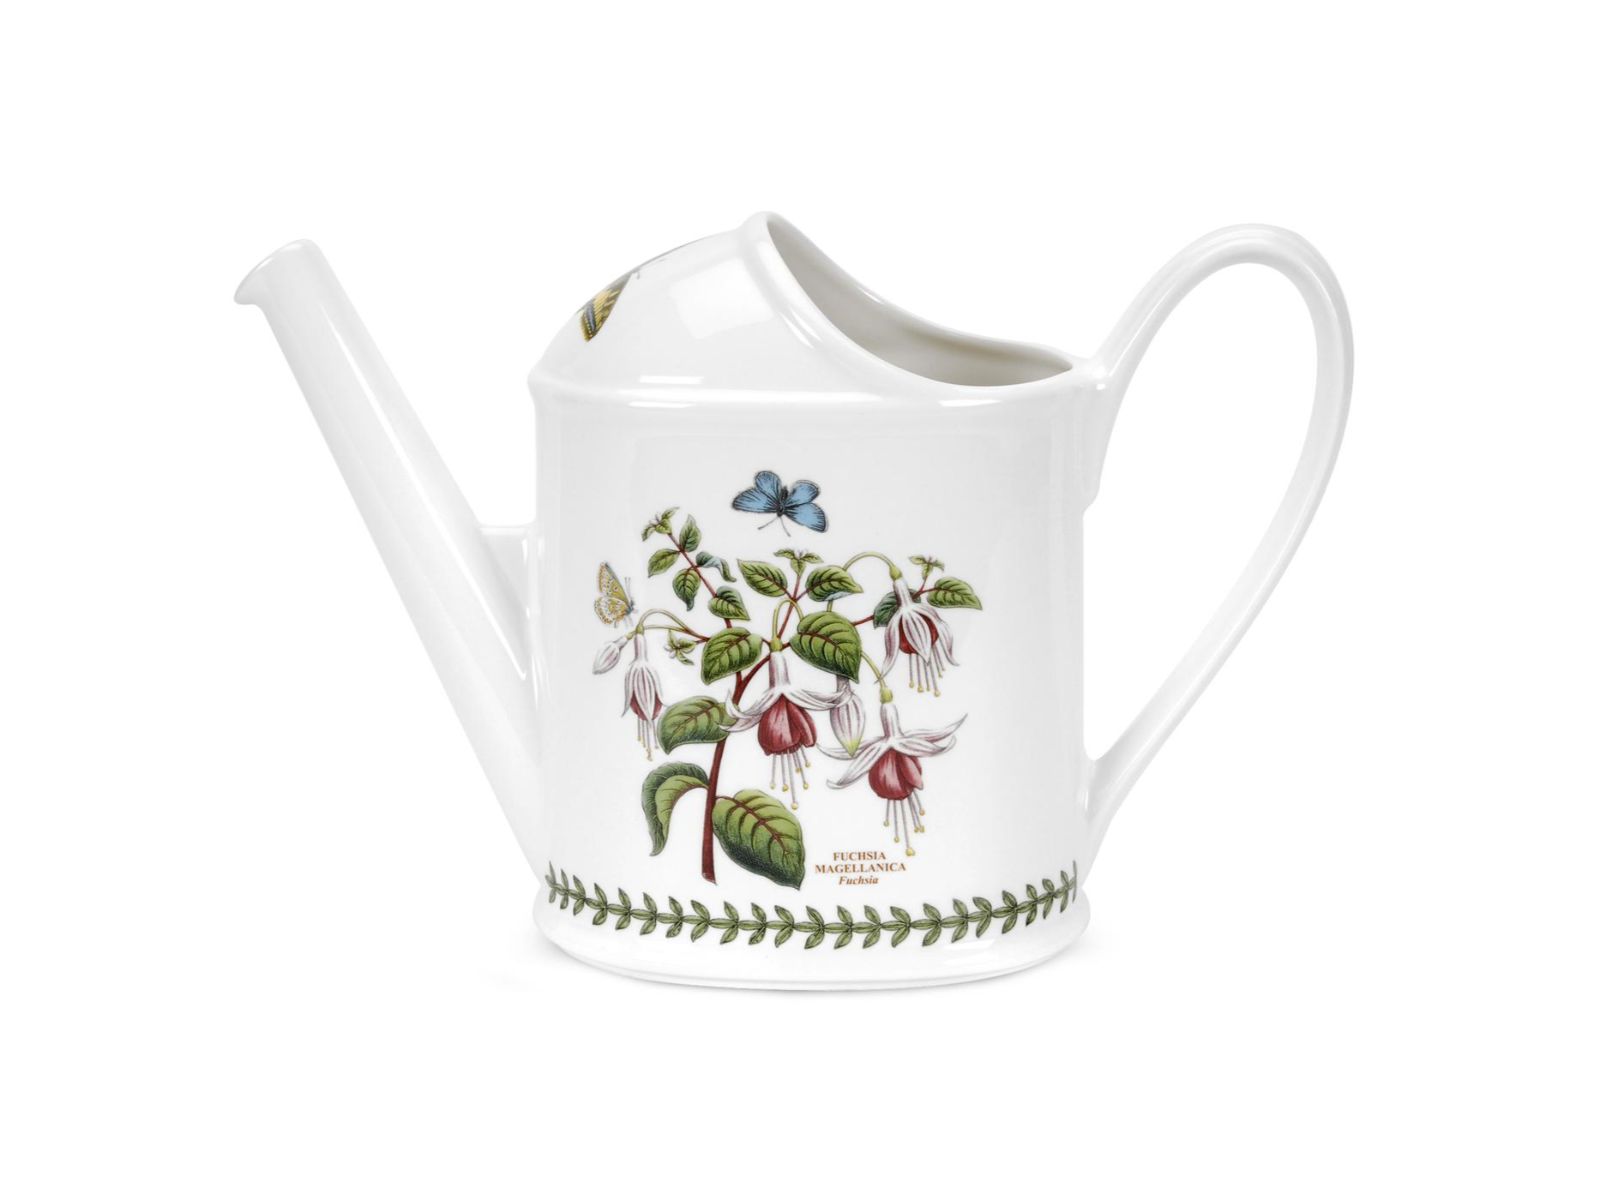 A white porcelain watering can with a laurel wreath rim around the bottom, with a delicate fuchsia design and butterflies around the sides.